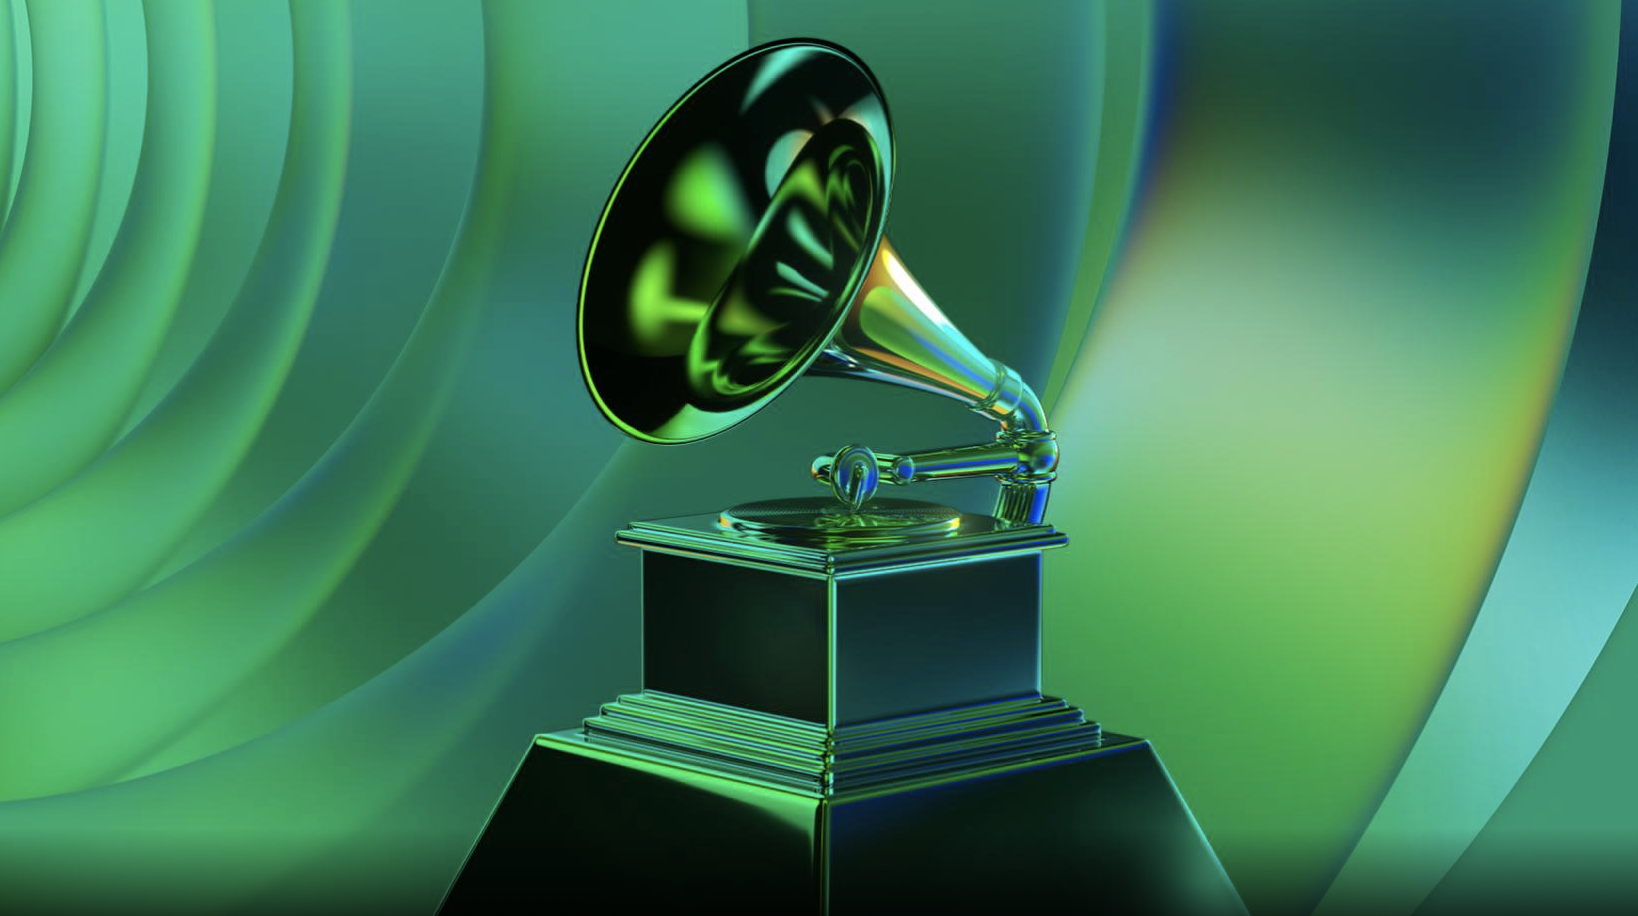 KAROL G, BAD BUNNY, J BALVIN, + More Are Nominated for The 2022 GRAMMY’s